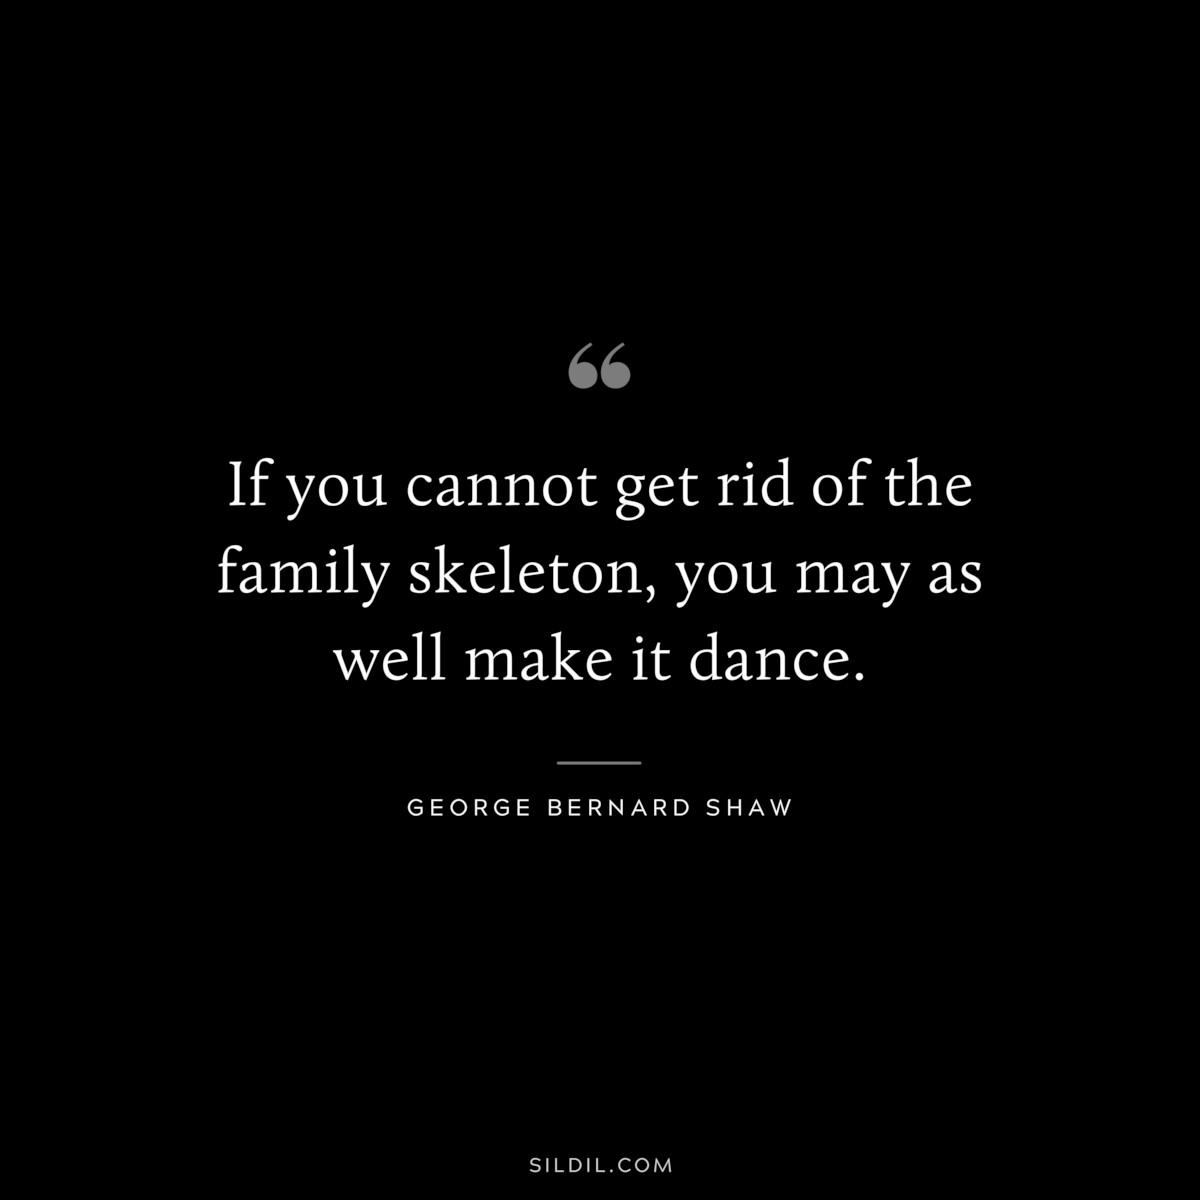 If you cannot get rid of the family skeleton, you may as well make it dance. ― George Bernard Shaw